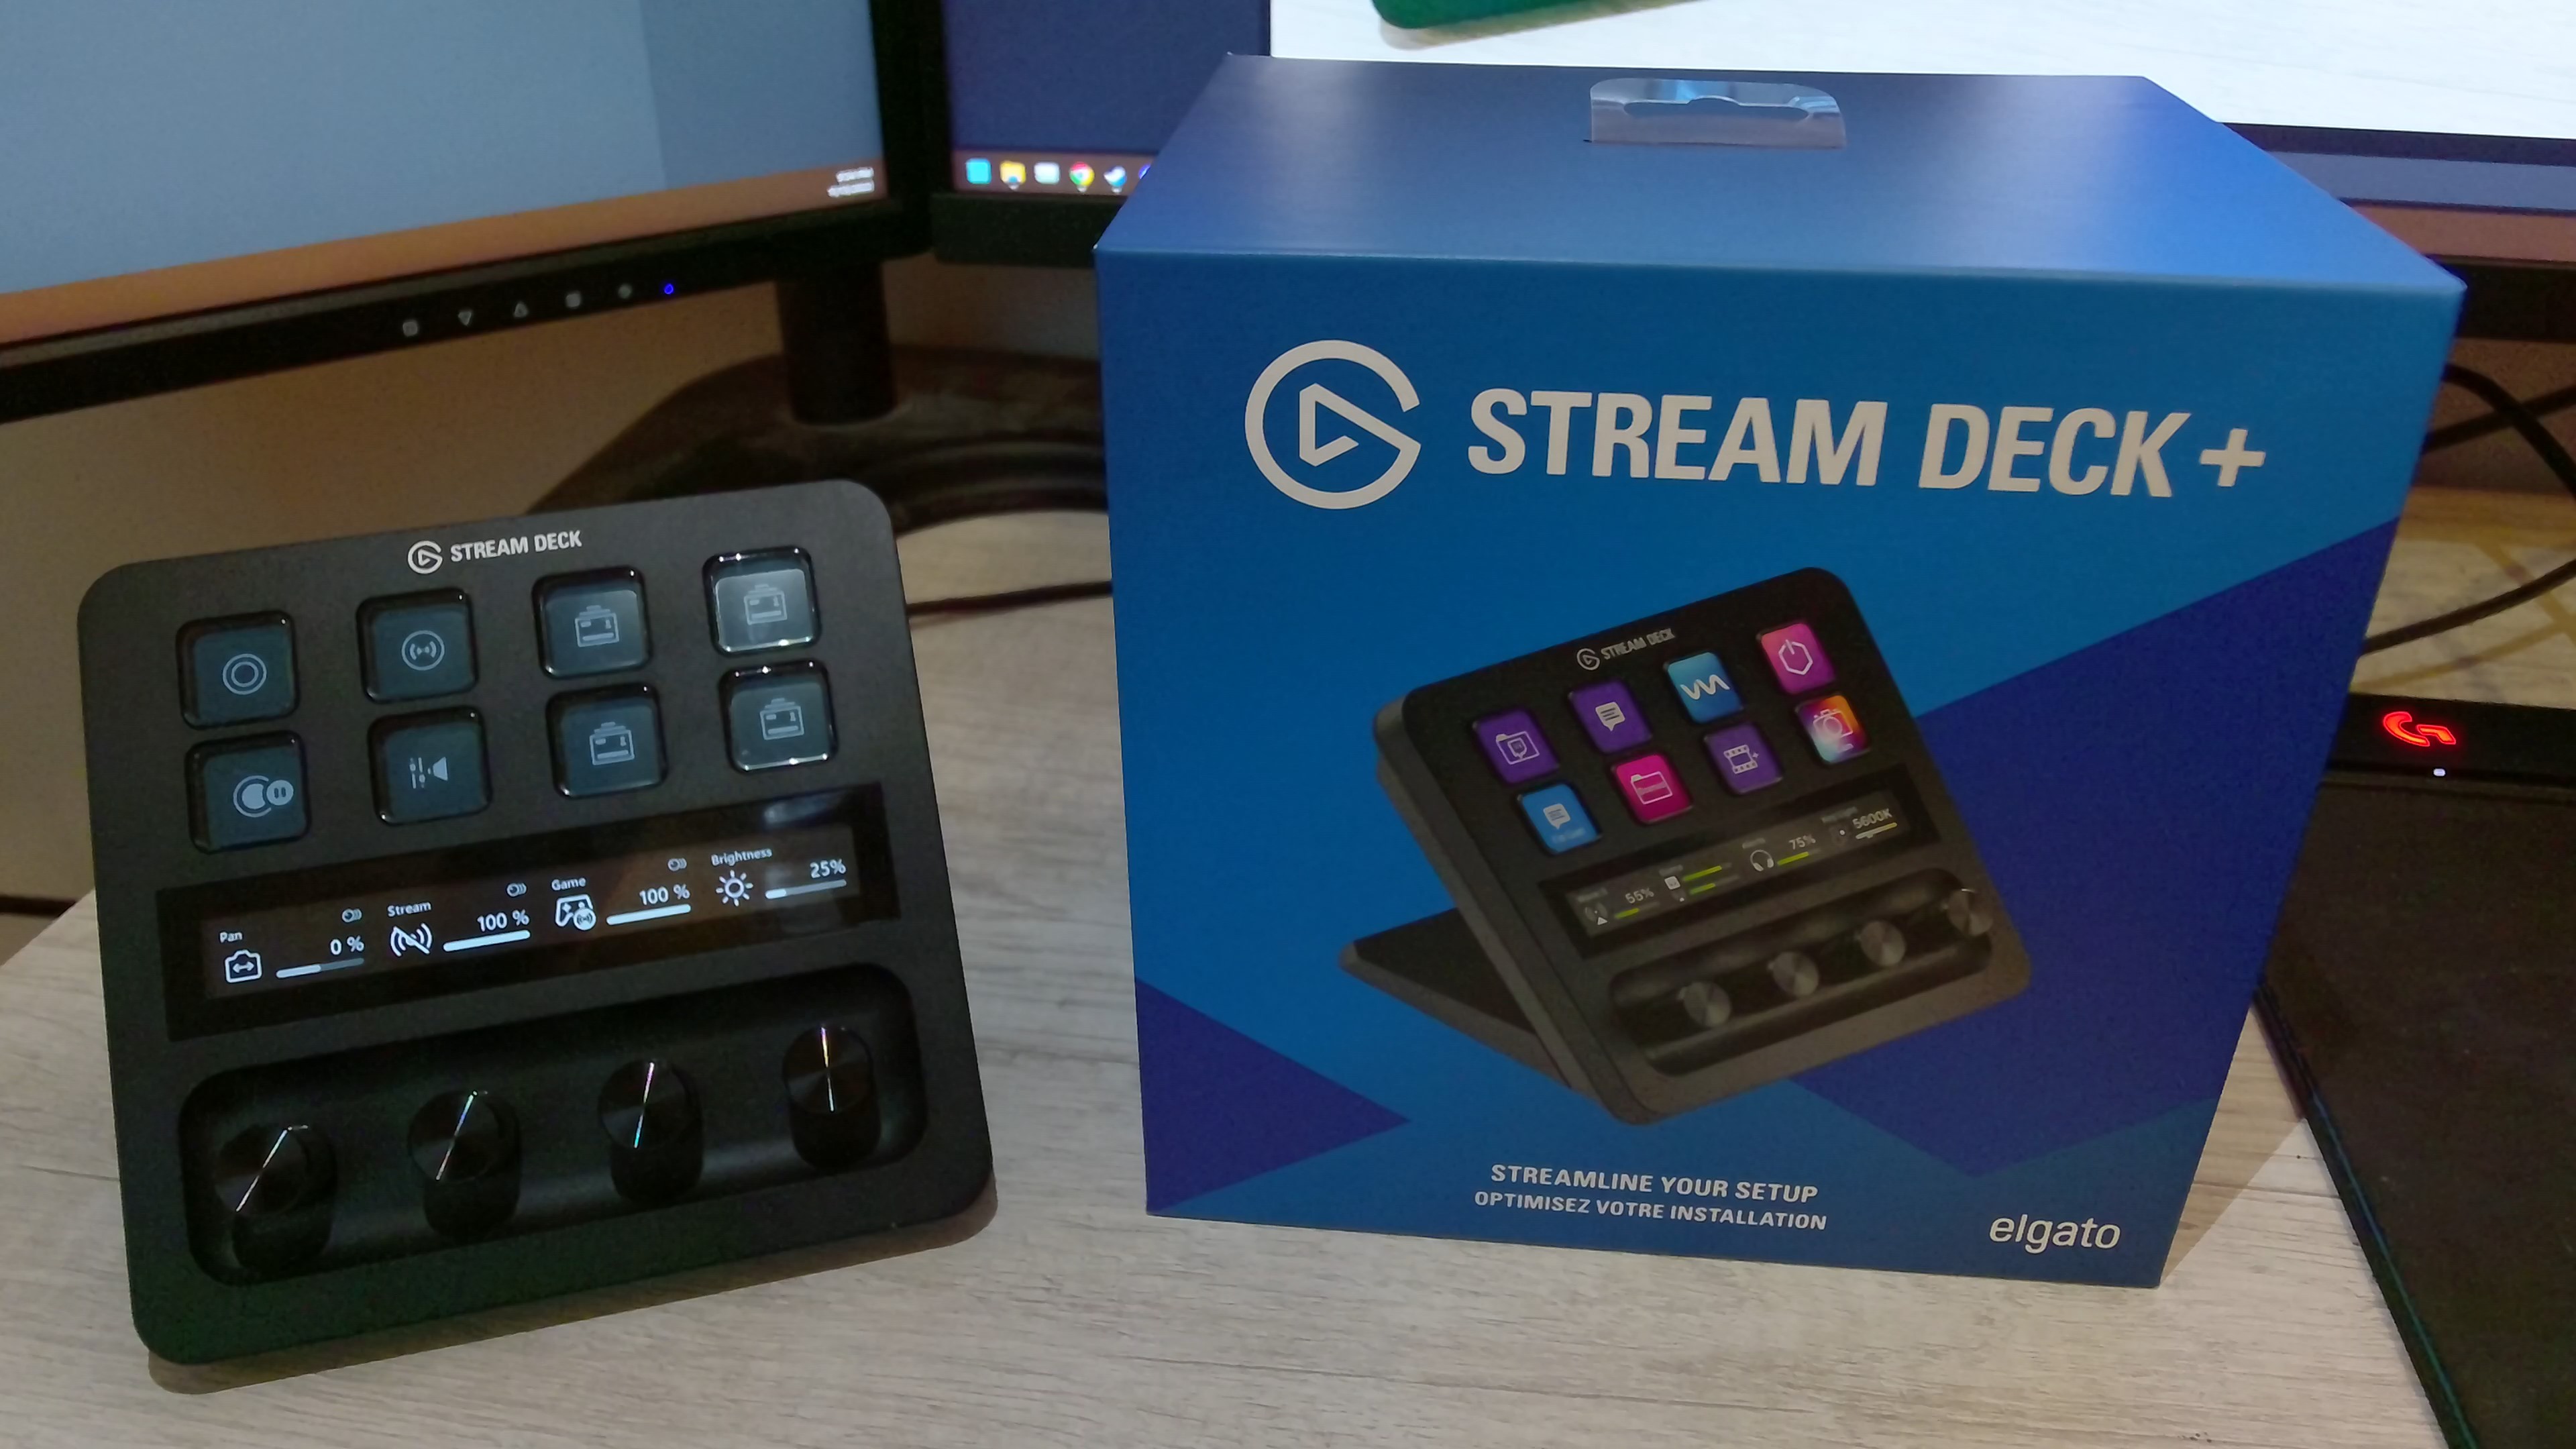 Elgato Stream Deck Mini Review - Does Bigger Always Equal Better?